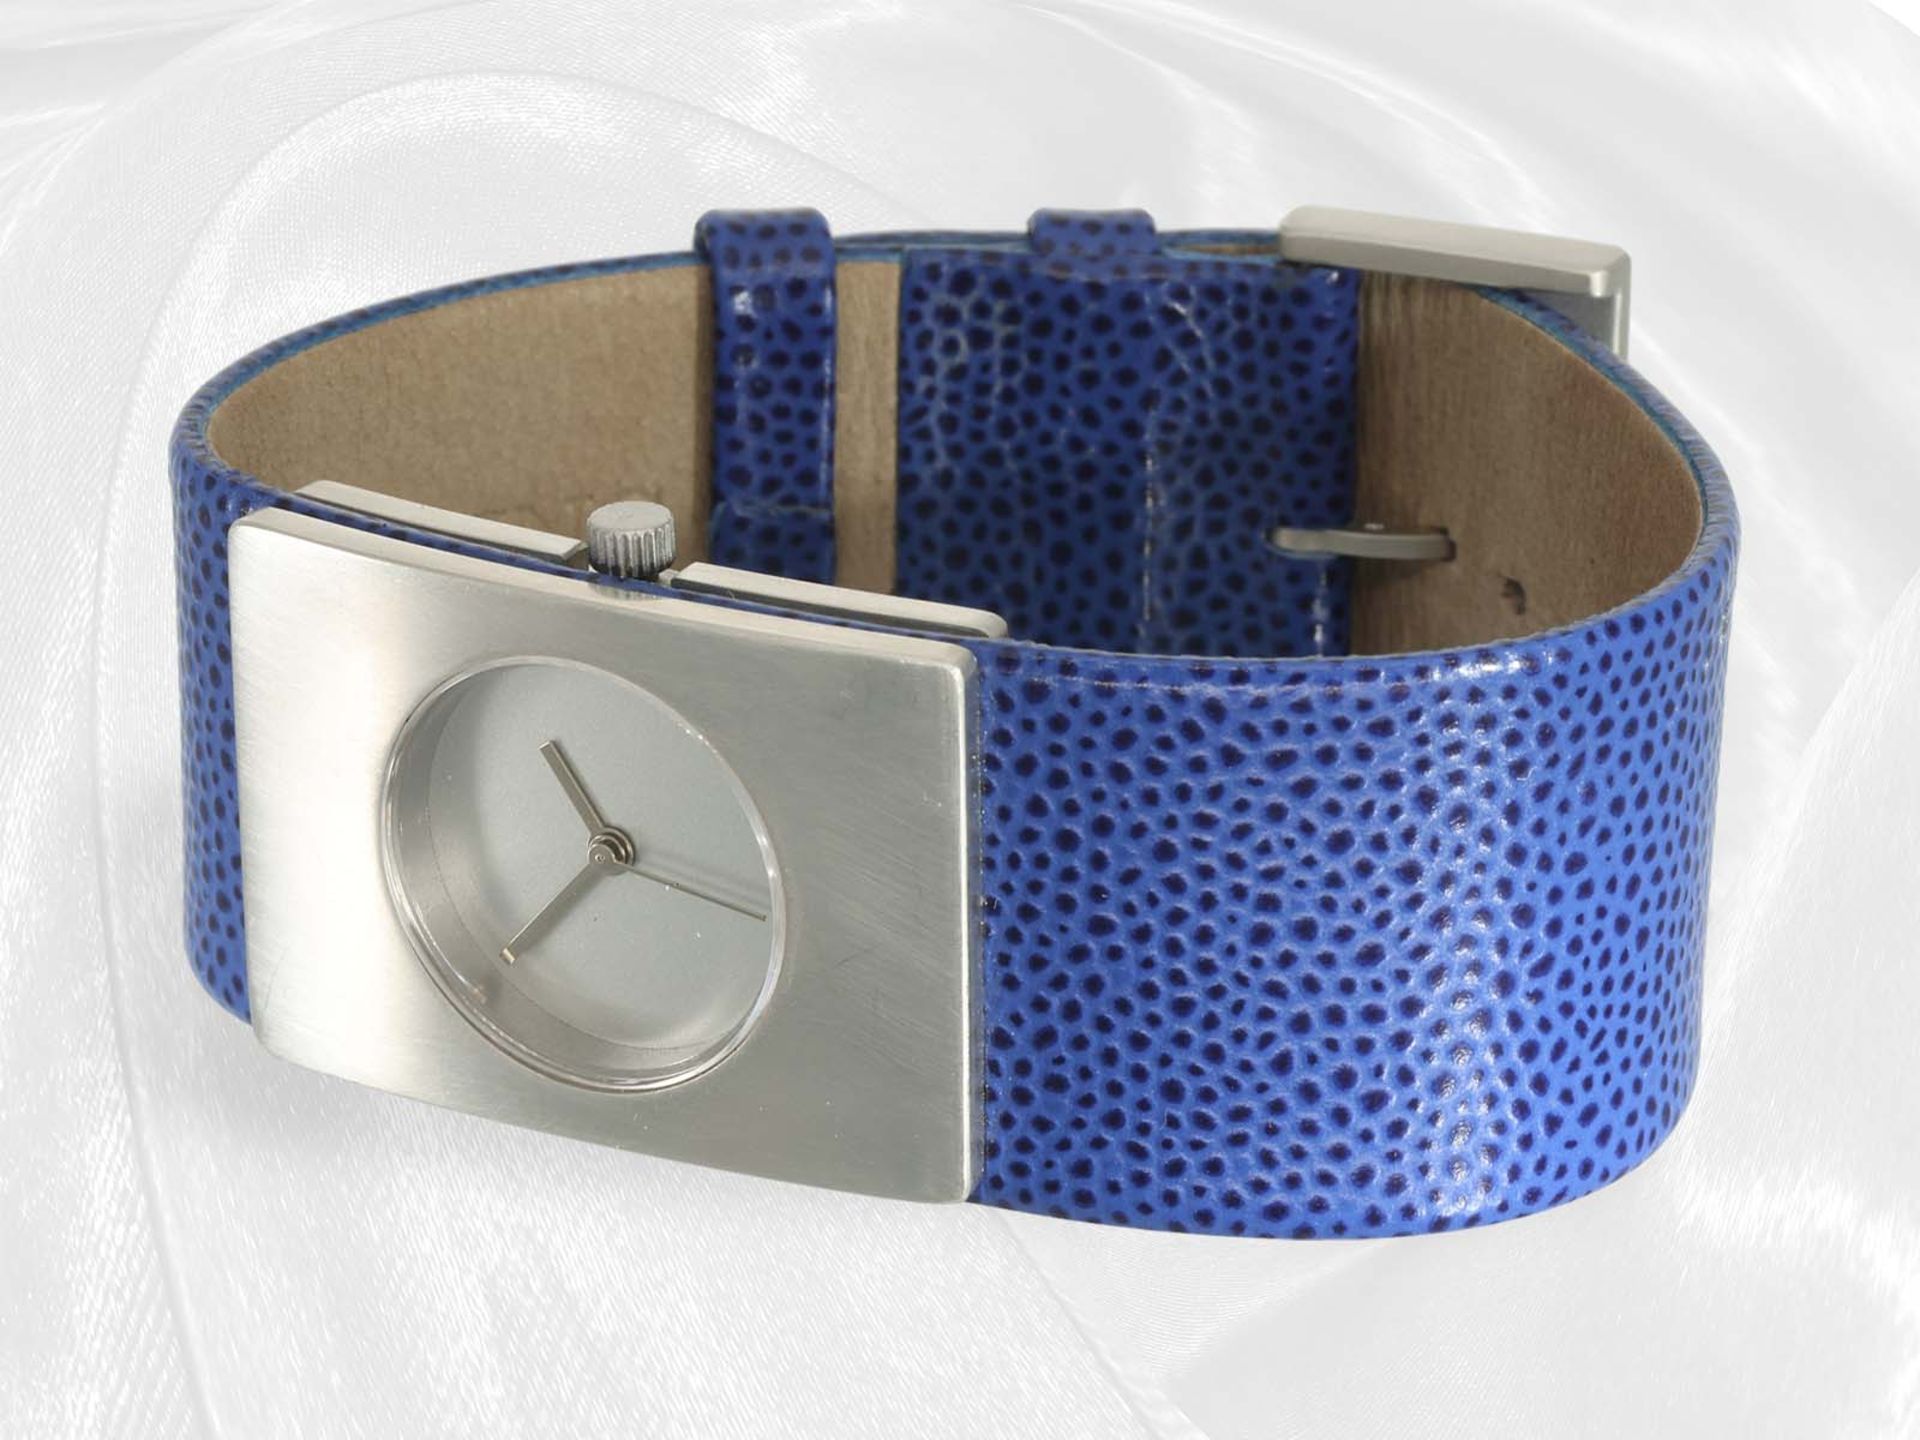 Very high-quality platinum designer wristwatch by Niessing Manufacture, "Radius 9" model - Image 2 of 5